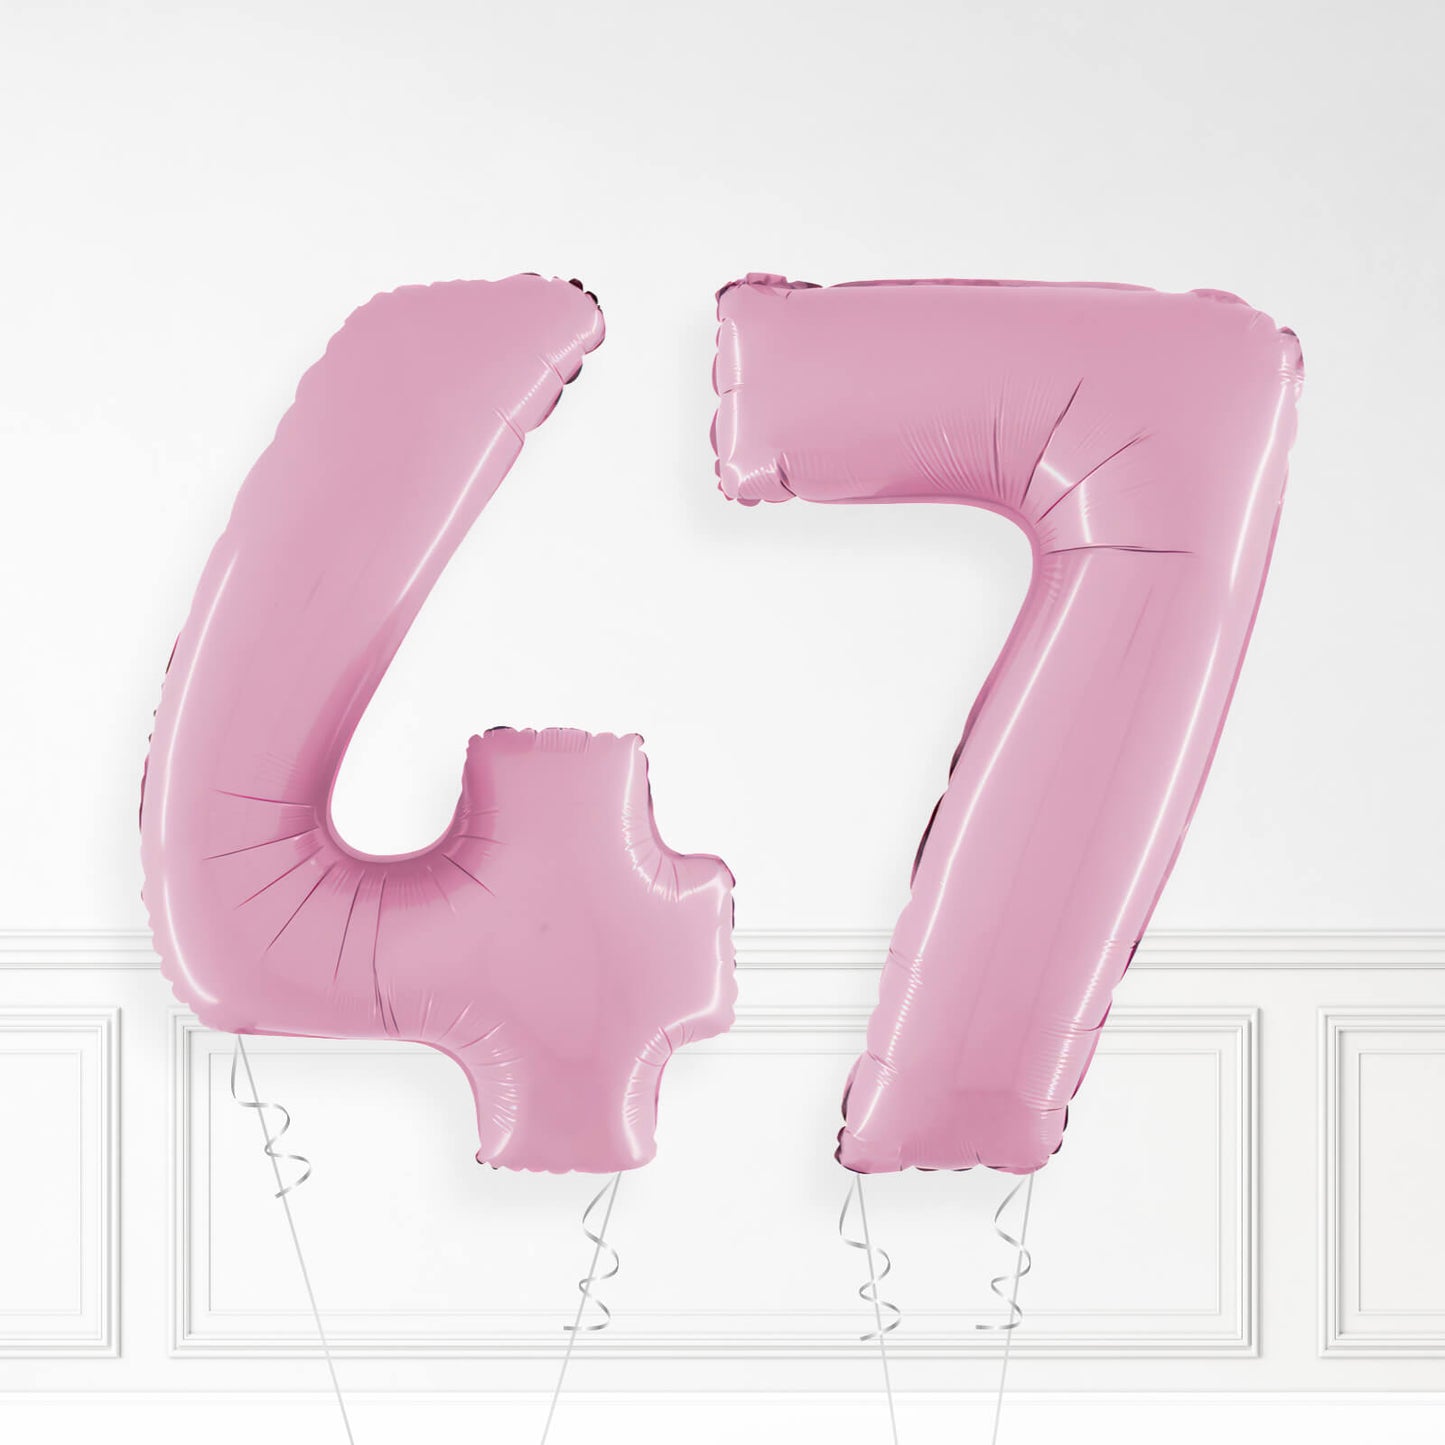 Inflated Pastel Pink Foil Number Balloon